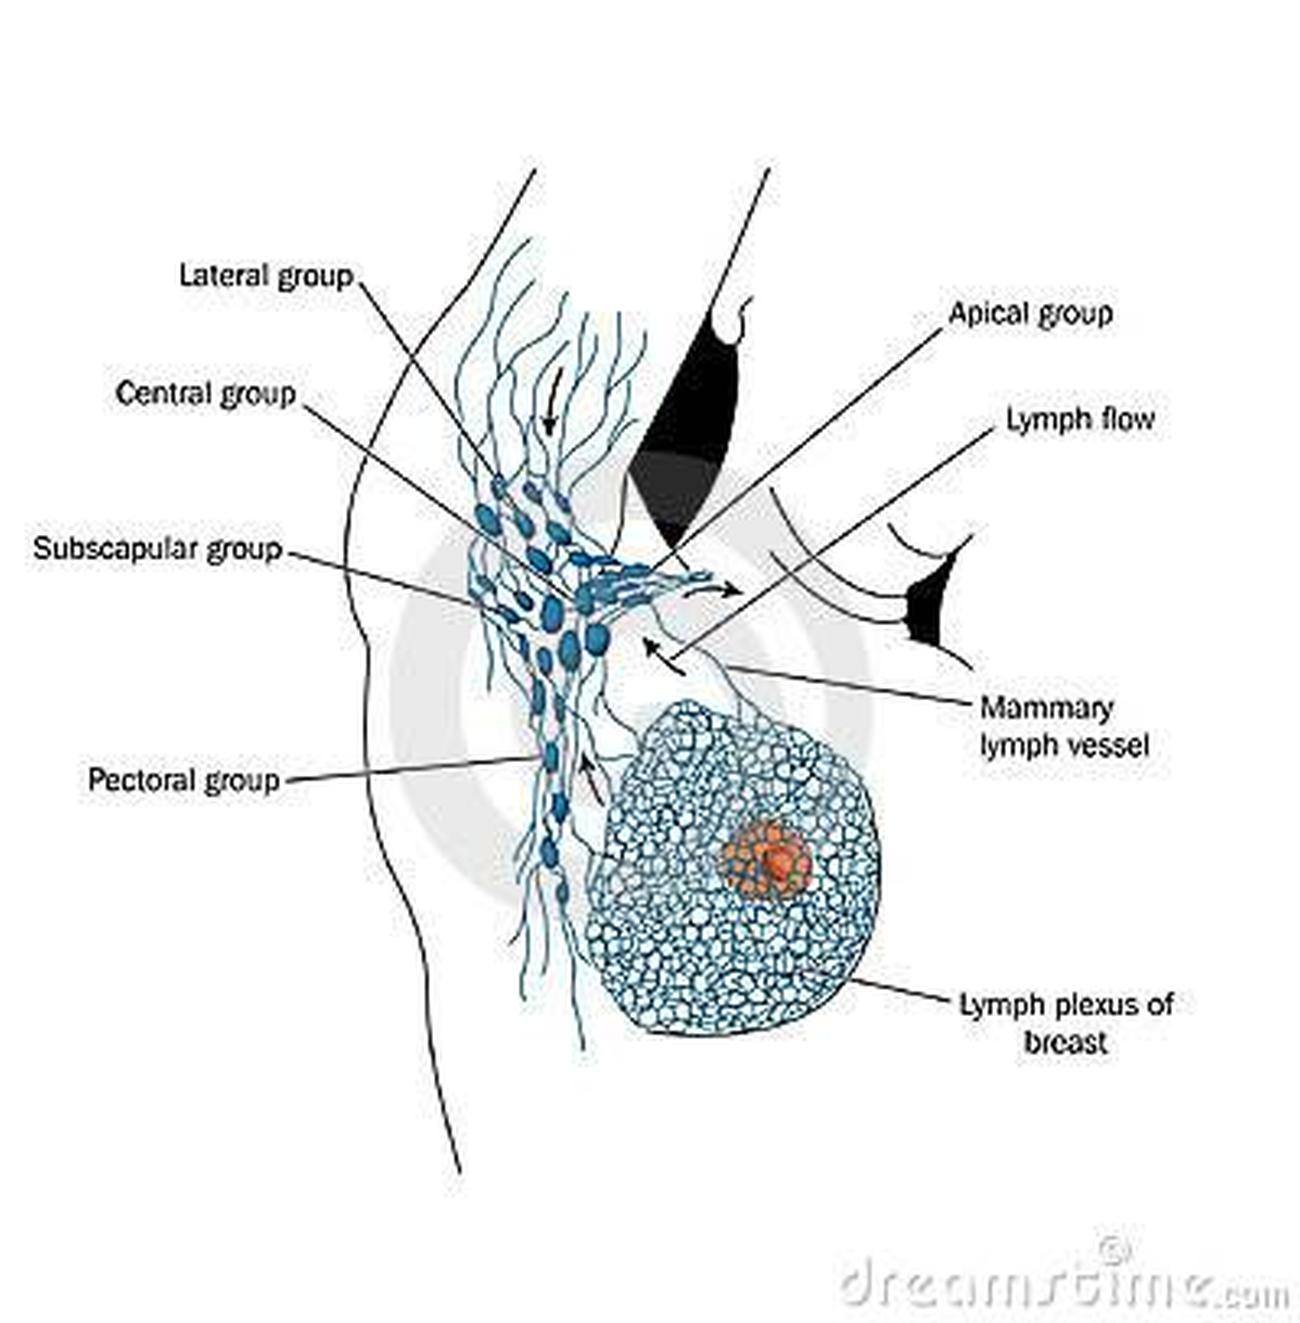 Pictures Of Axillary Lymph Nodes